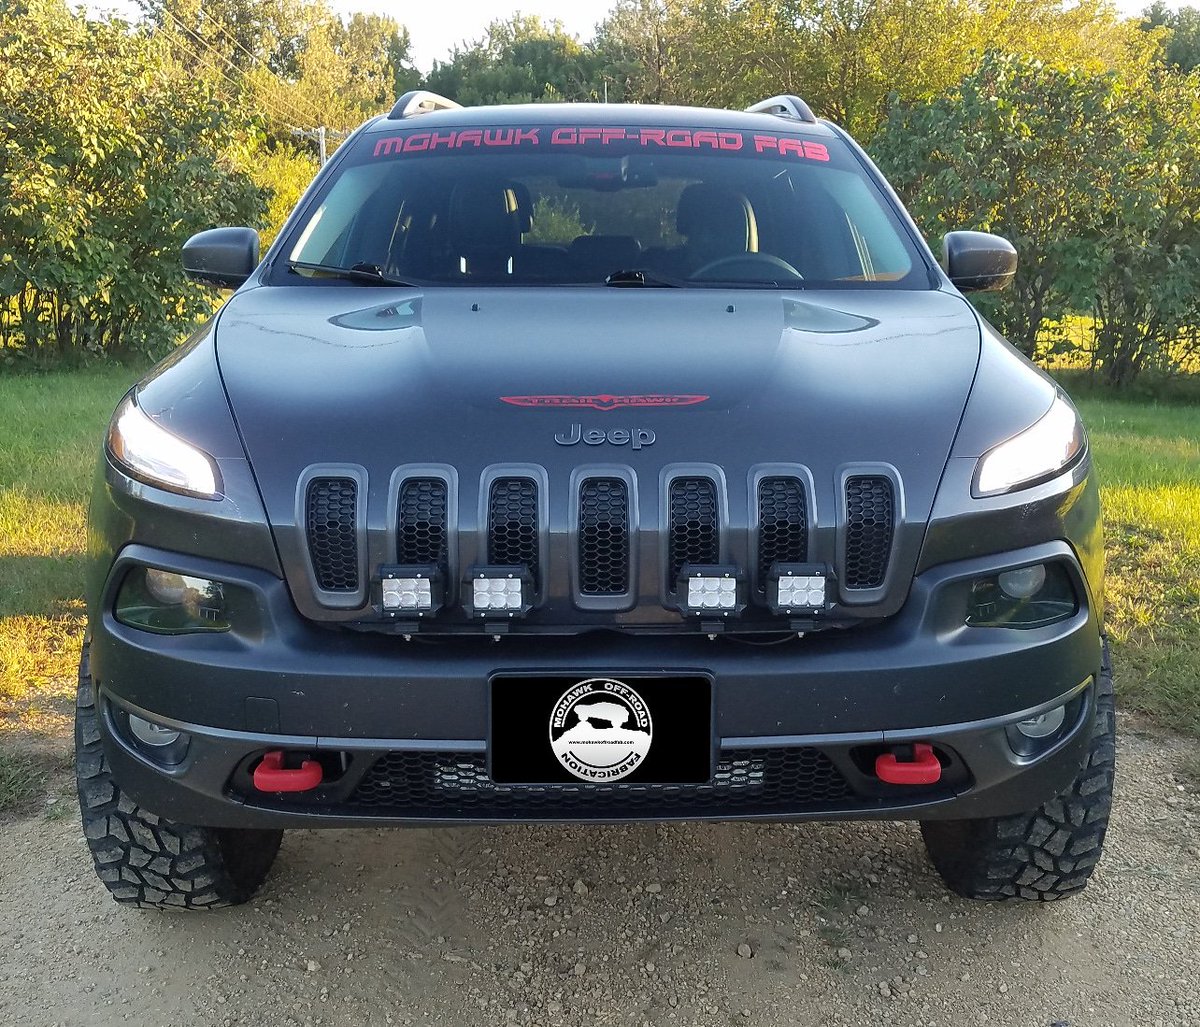 Jeep Cherokee KL Owners... 15% OFF END OF SUMMER SALE. Pod Light & Light Bar Mounting Brackets for your Jeep All products on sale until 10/31/18 Go to Store page for sale price purchasing: mohawkoffroadfab.com
#jeepcherokeeKL #liftedkl #KL  #trailhawk #JeepPodLightMounts